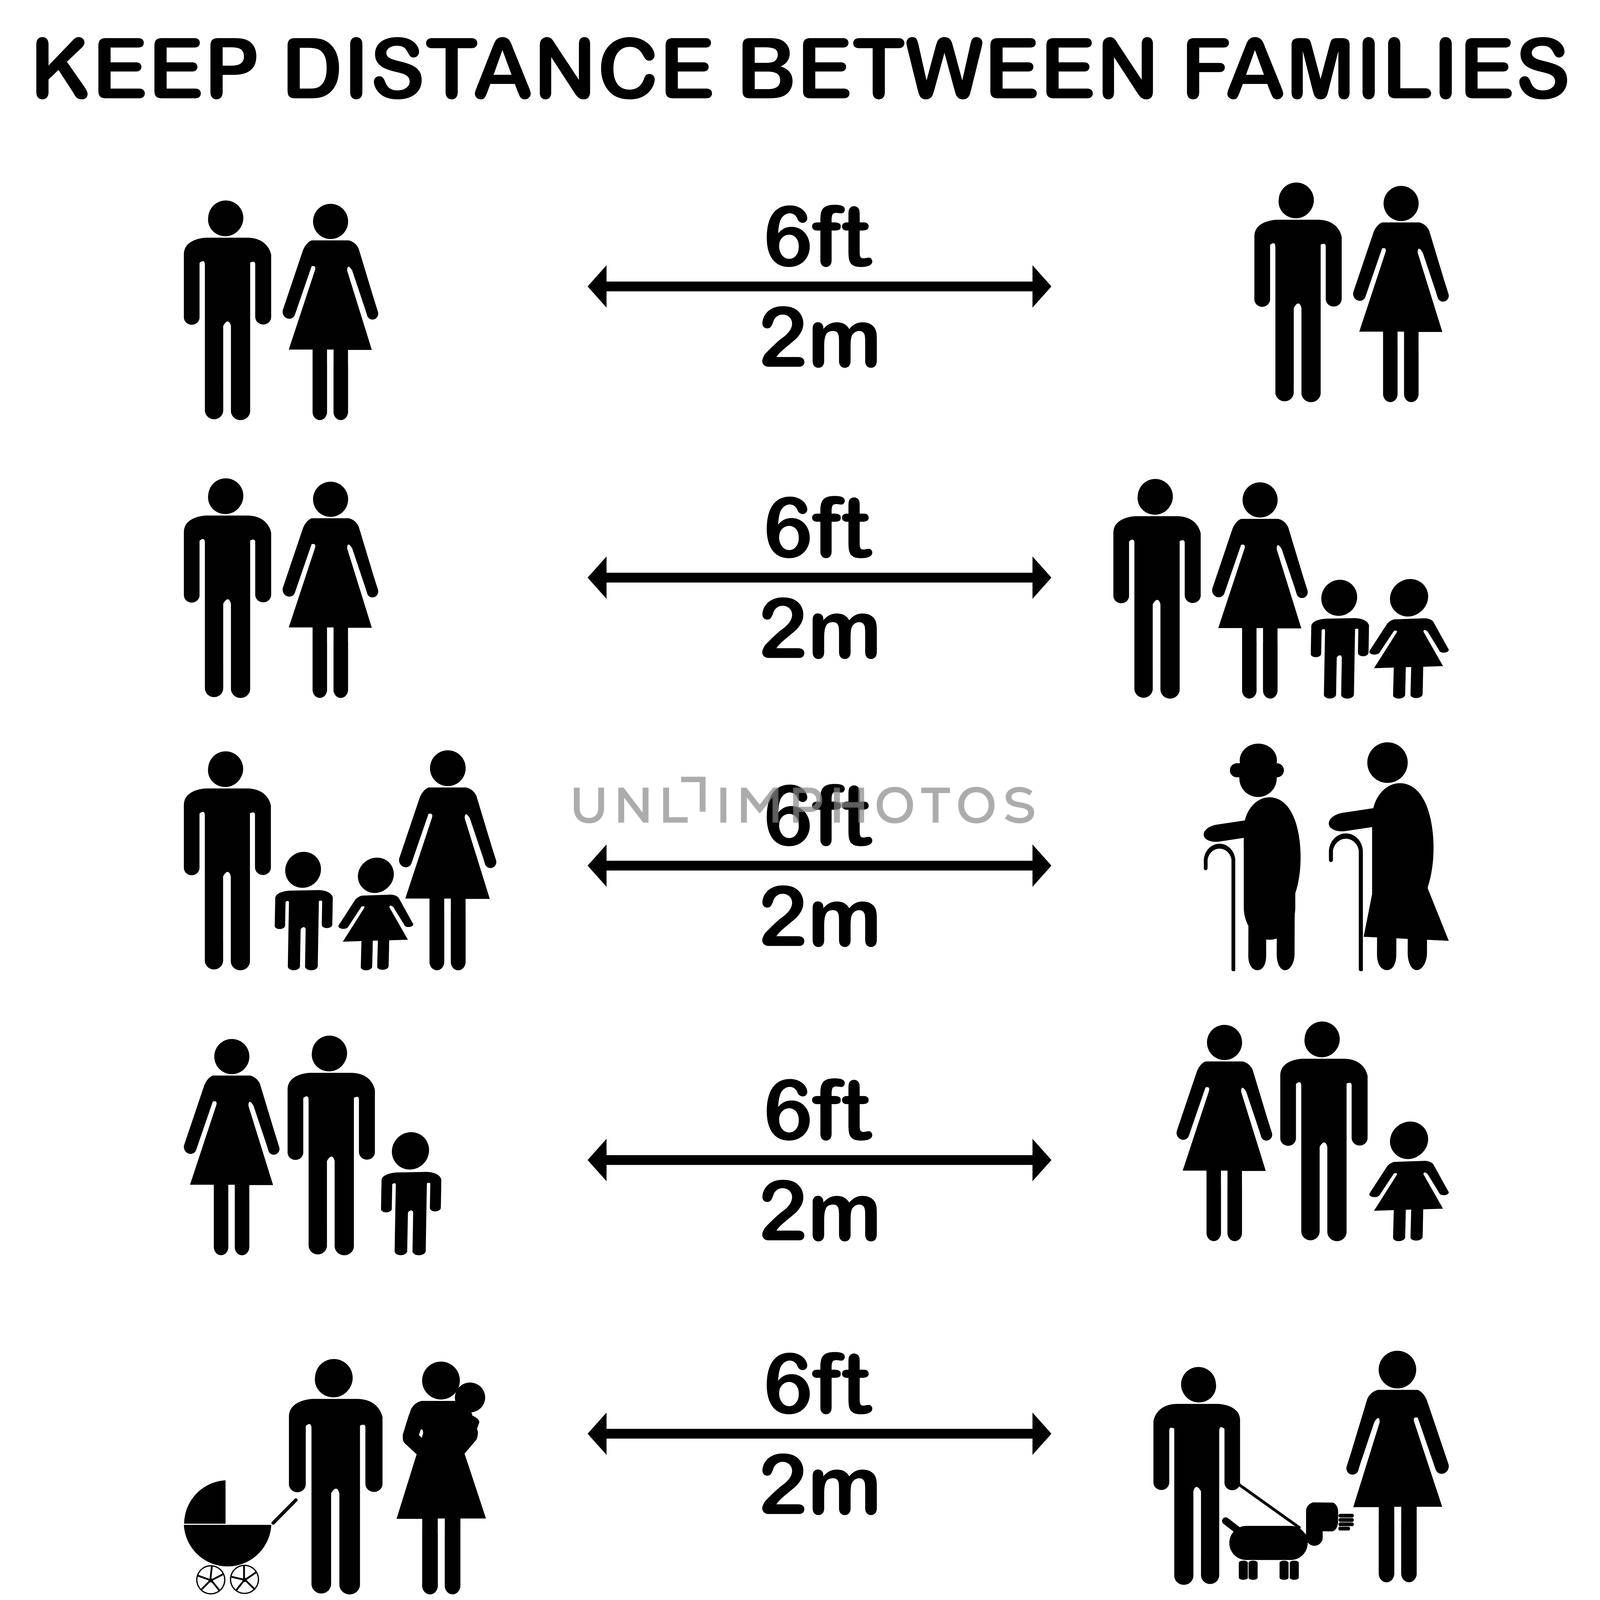 Keep distance between families concept by hibrida13